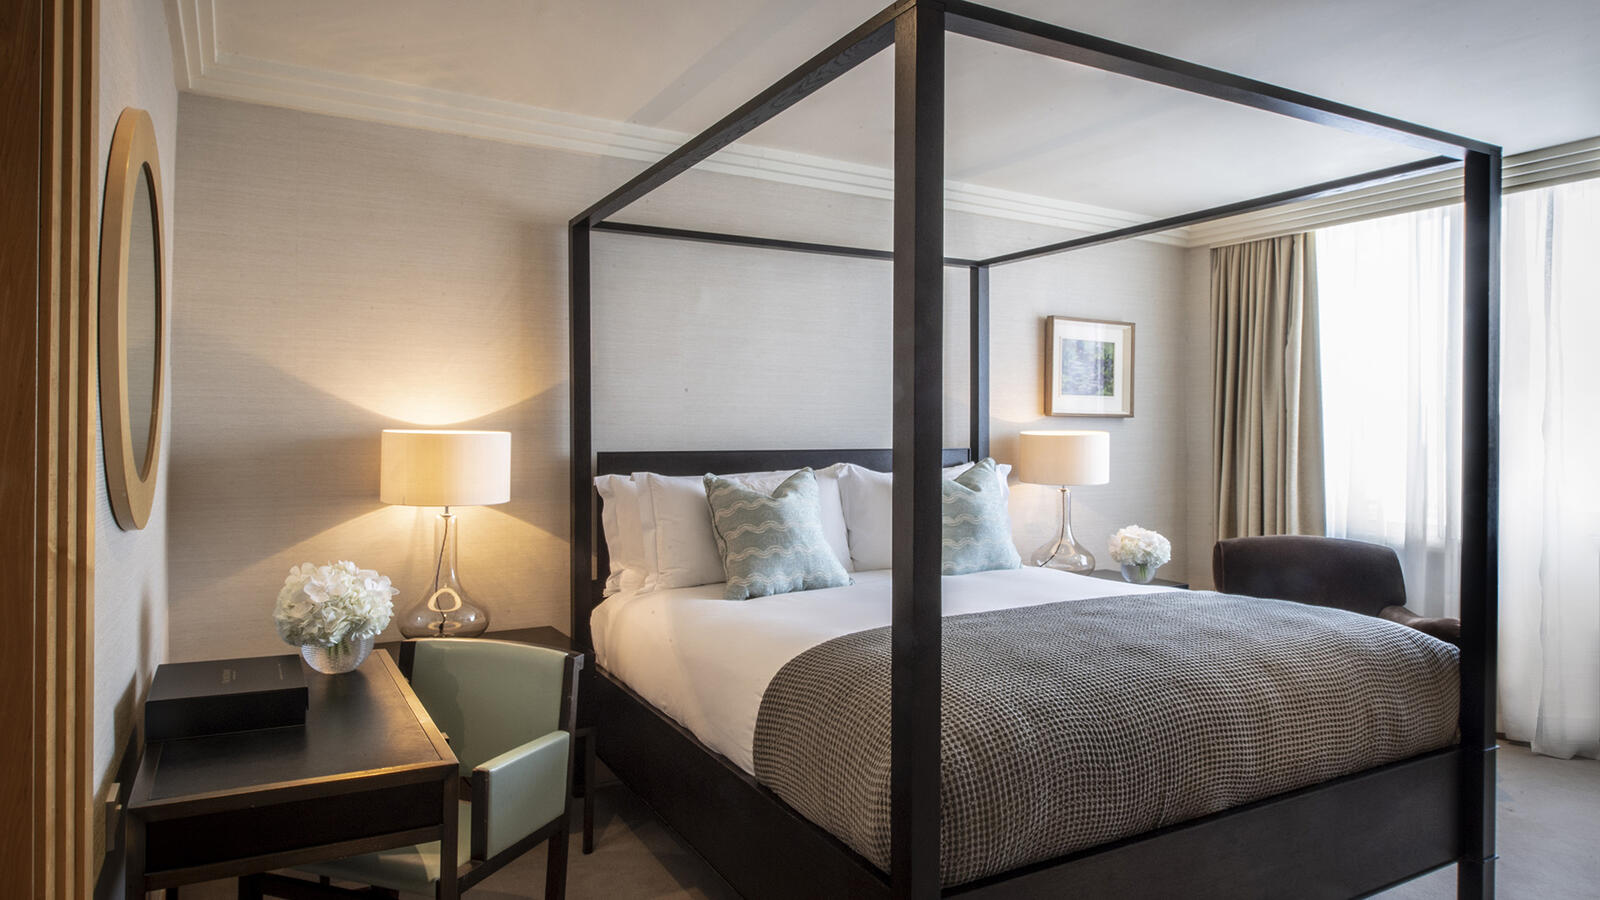 Luxury Suite with four poster bed at The Westbury hotel in Dublin